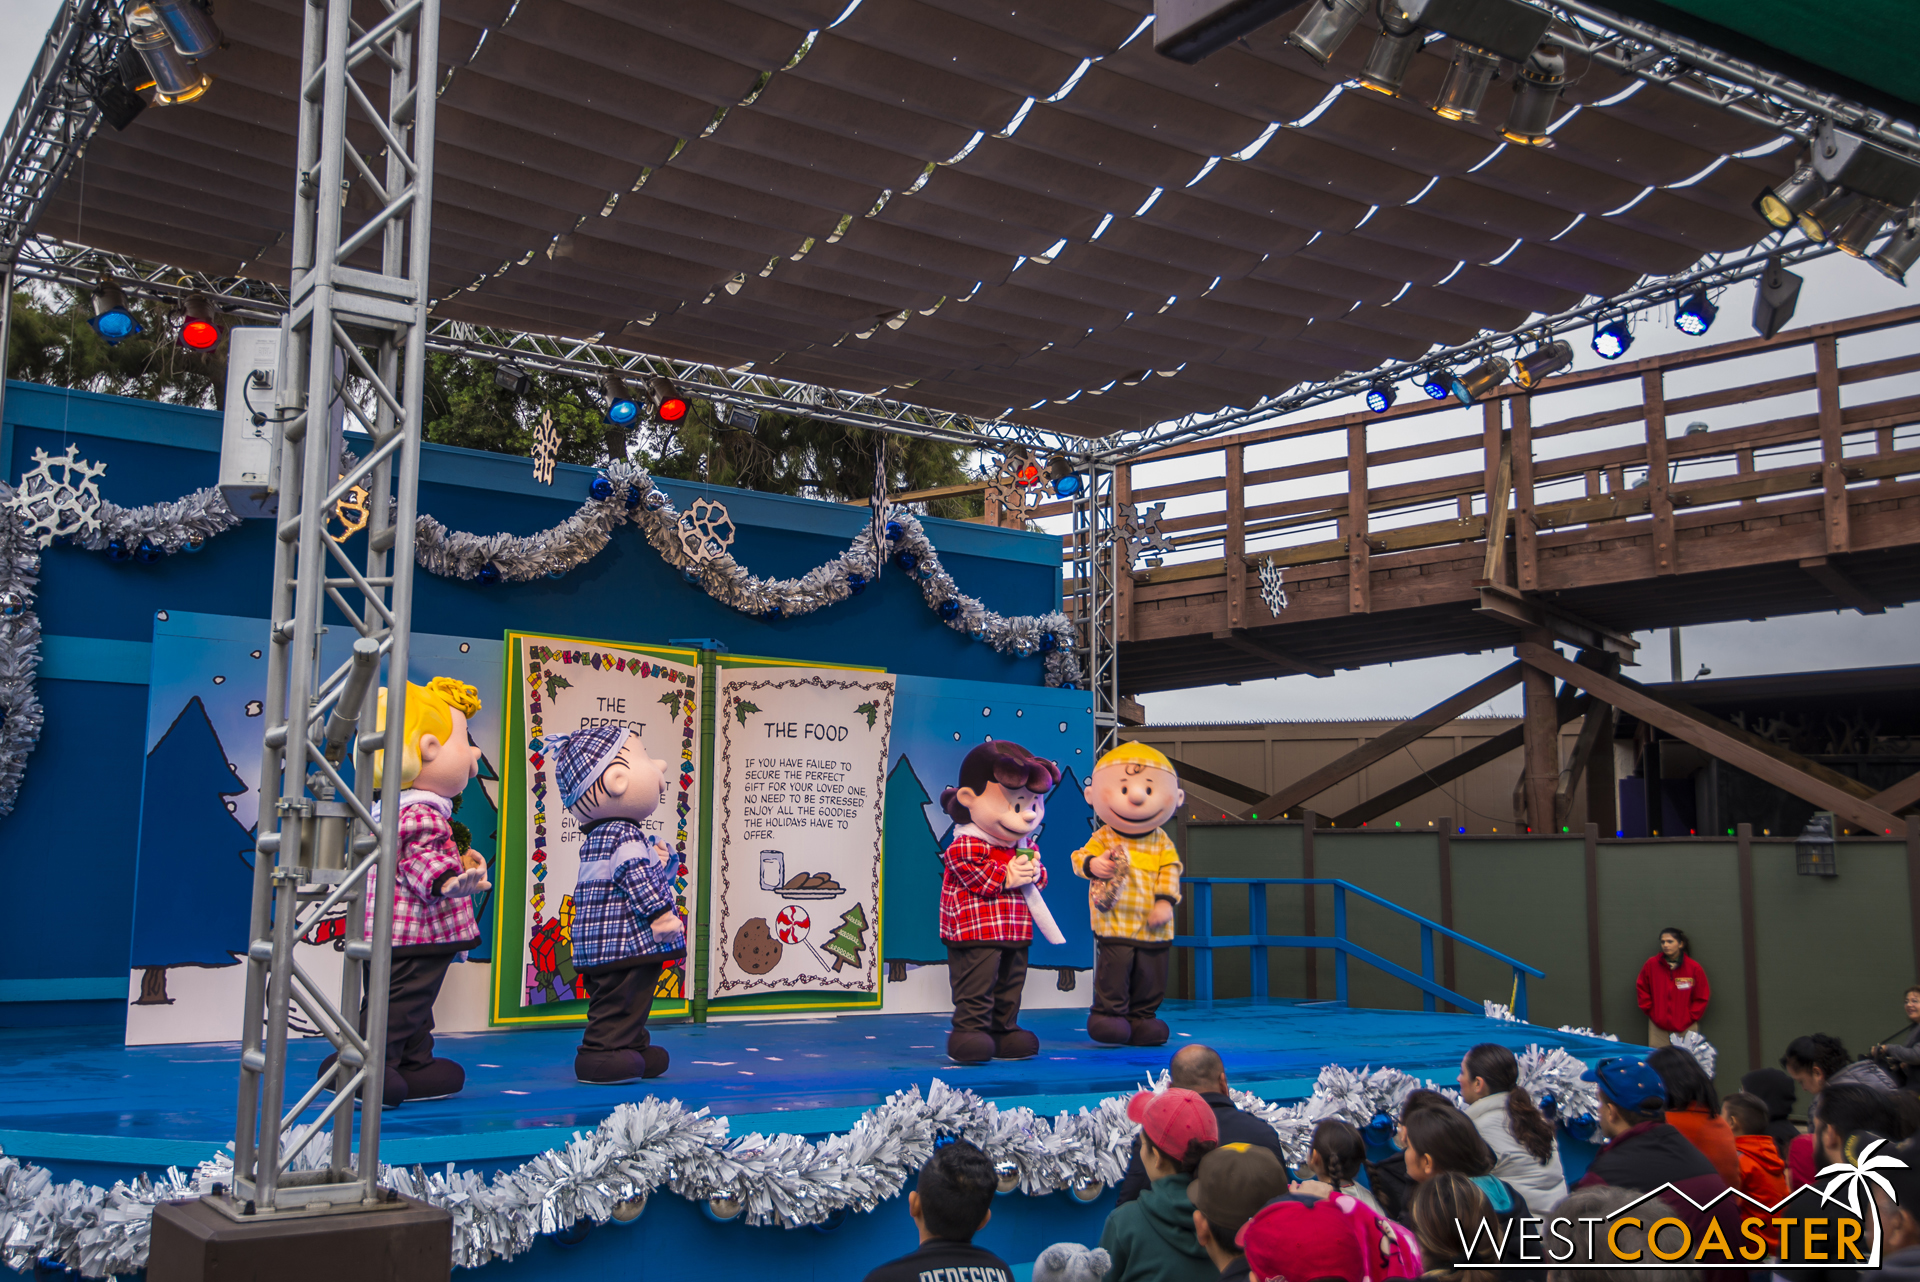  This is one of several Peanuts Christmas shows at Knott's Merry Farm. 